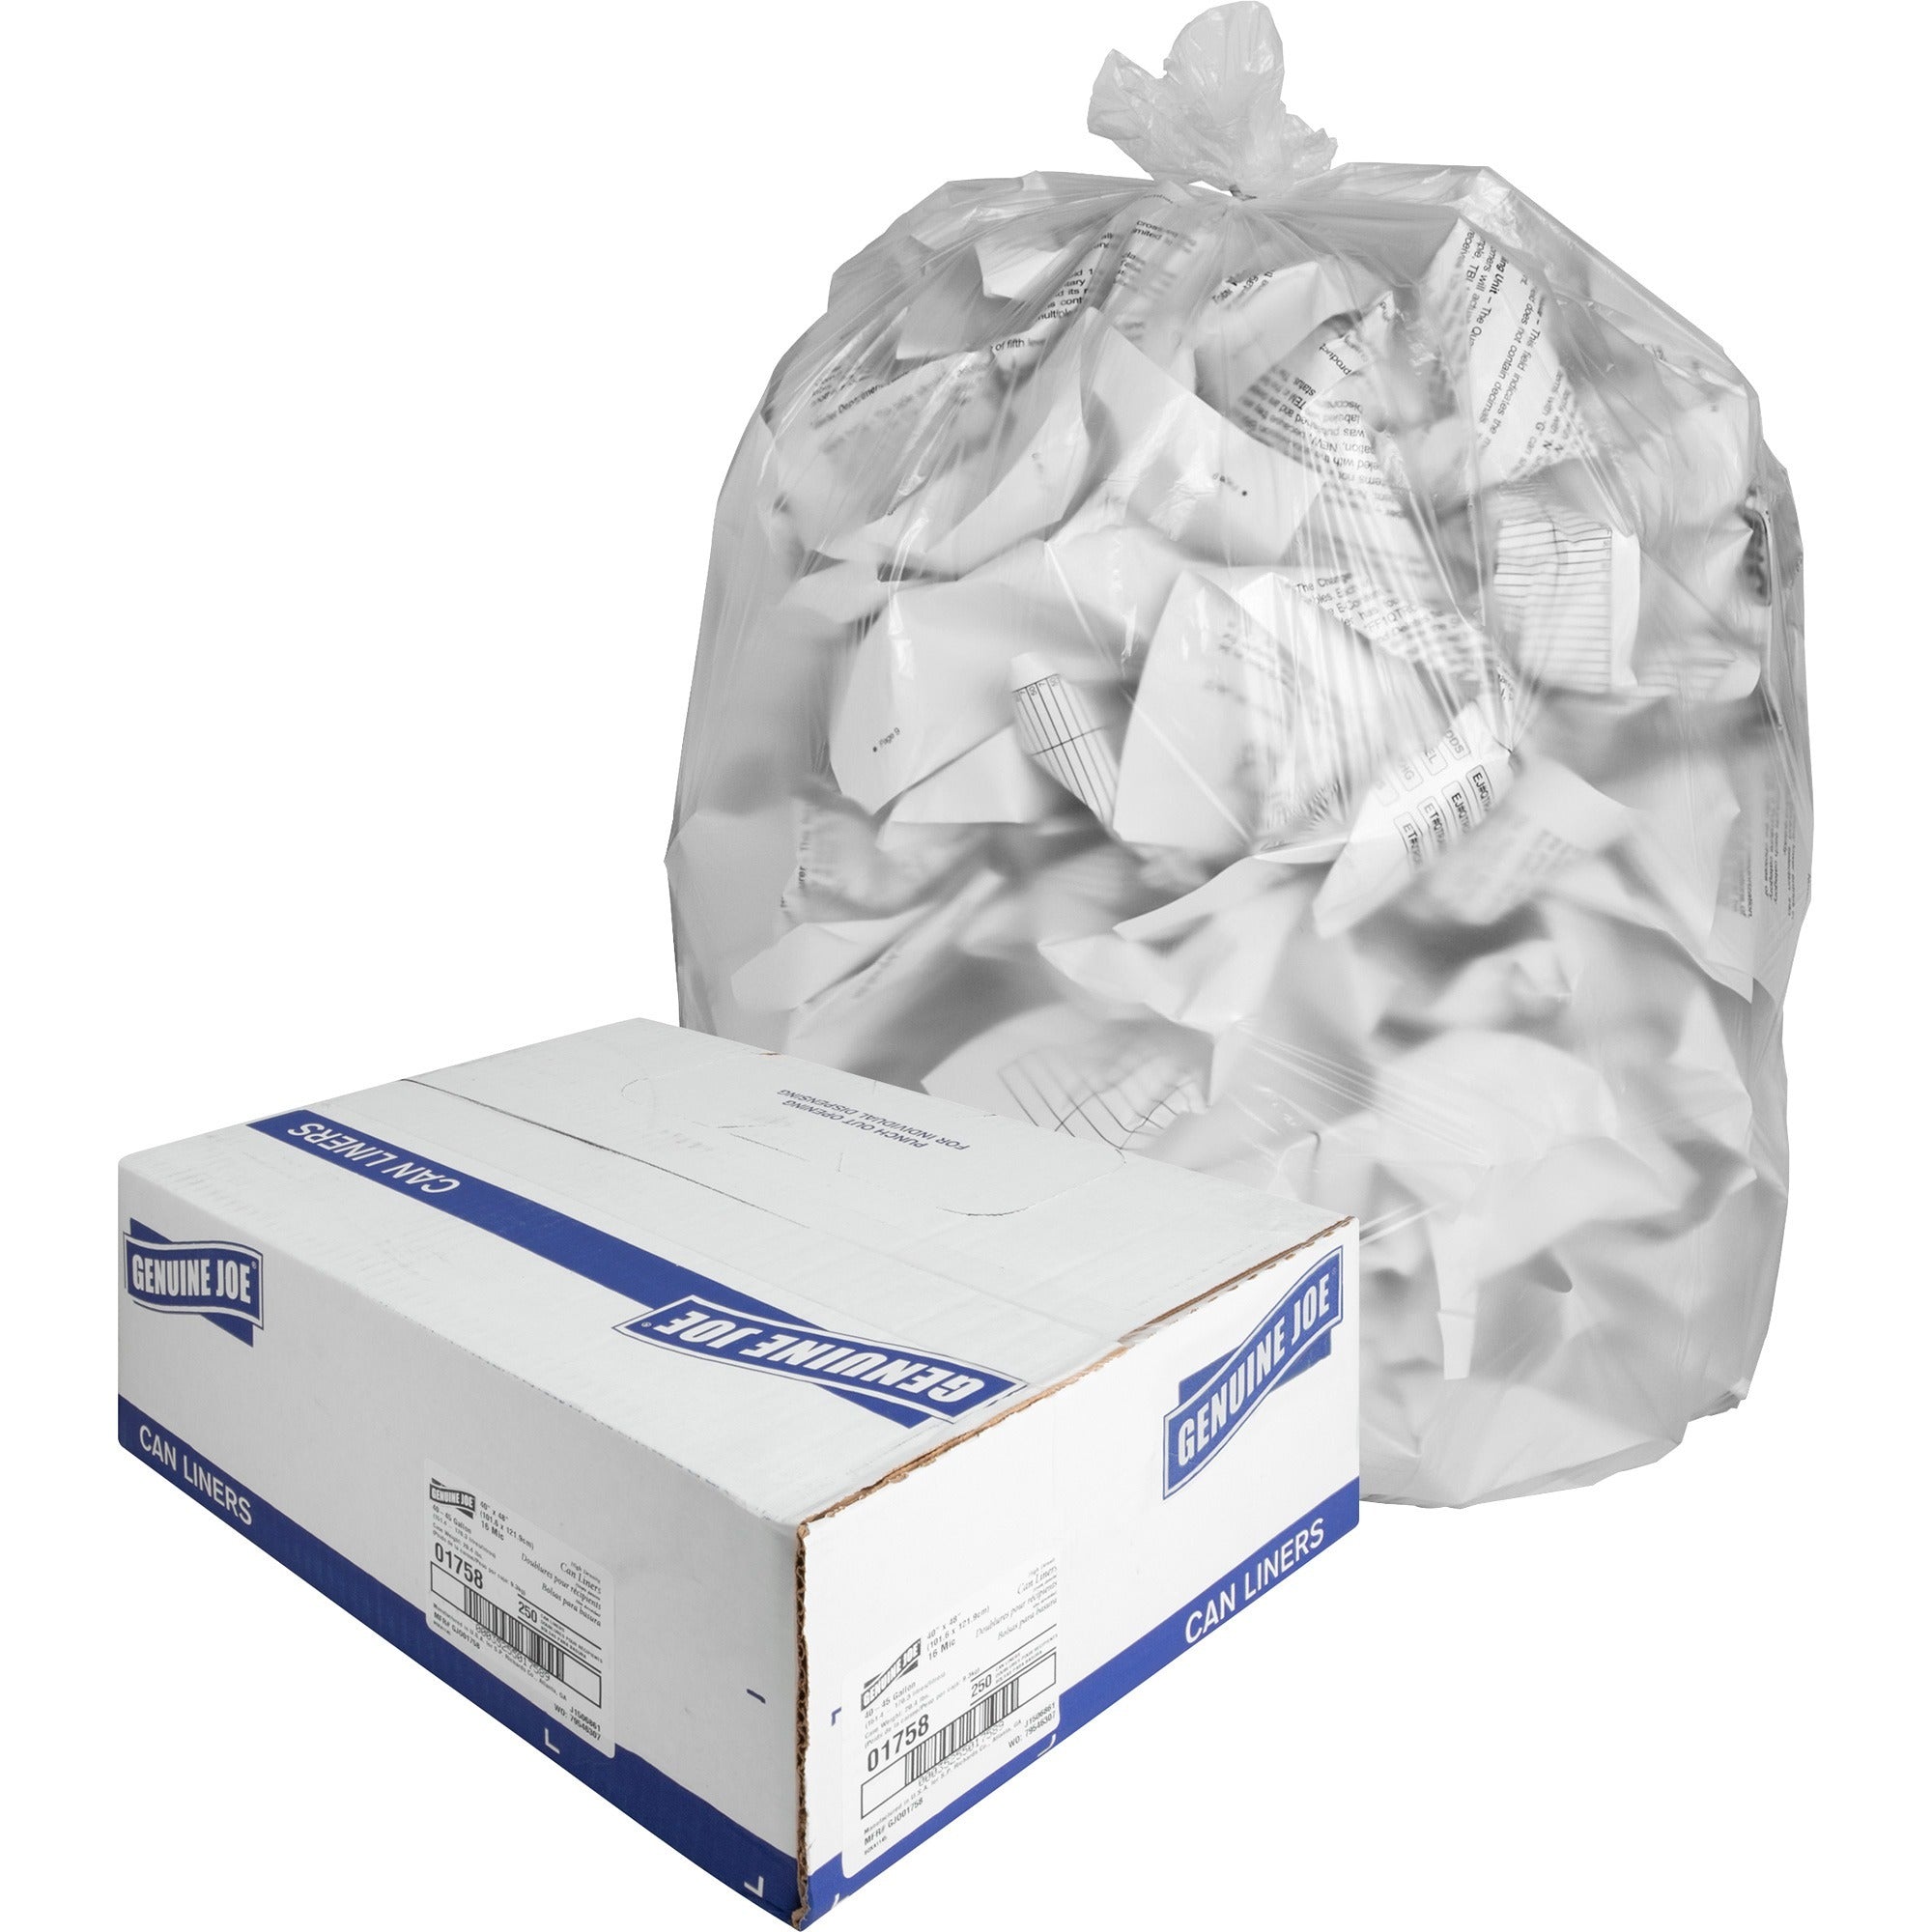 Genuine Joe High-density Can Liners - Large Size - 45 gal Capacity - 40" Width x 48" Length - 0.63 mil (16 Micron) Thickness - High Density - Clear - Resin - 10/Carton - 25 Per Roll - Office Waste, Industrial Trash - 